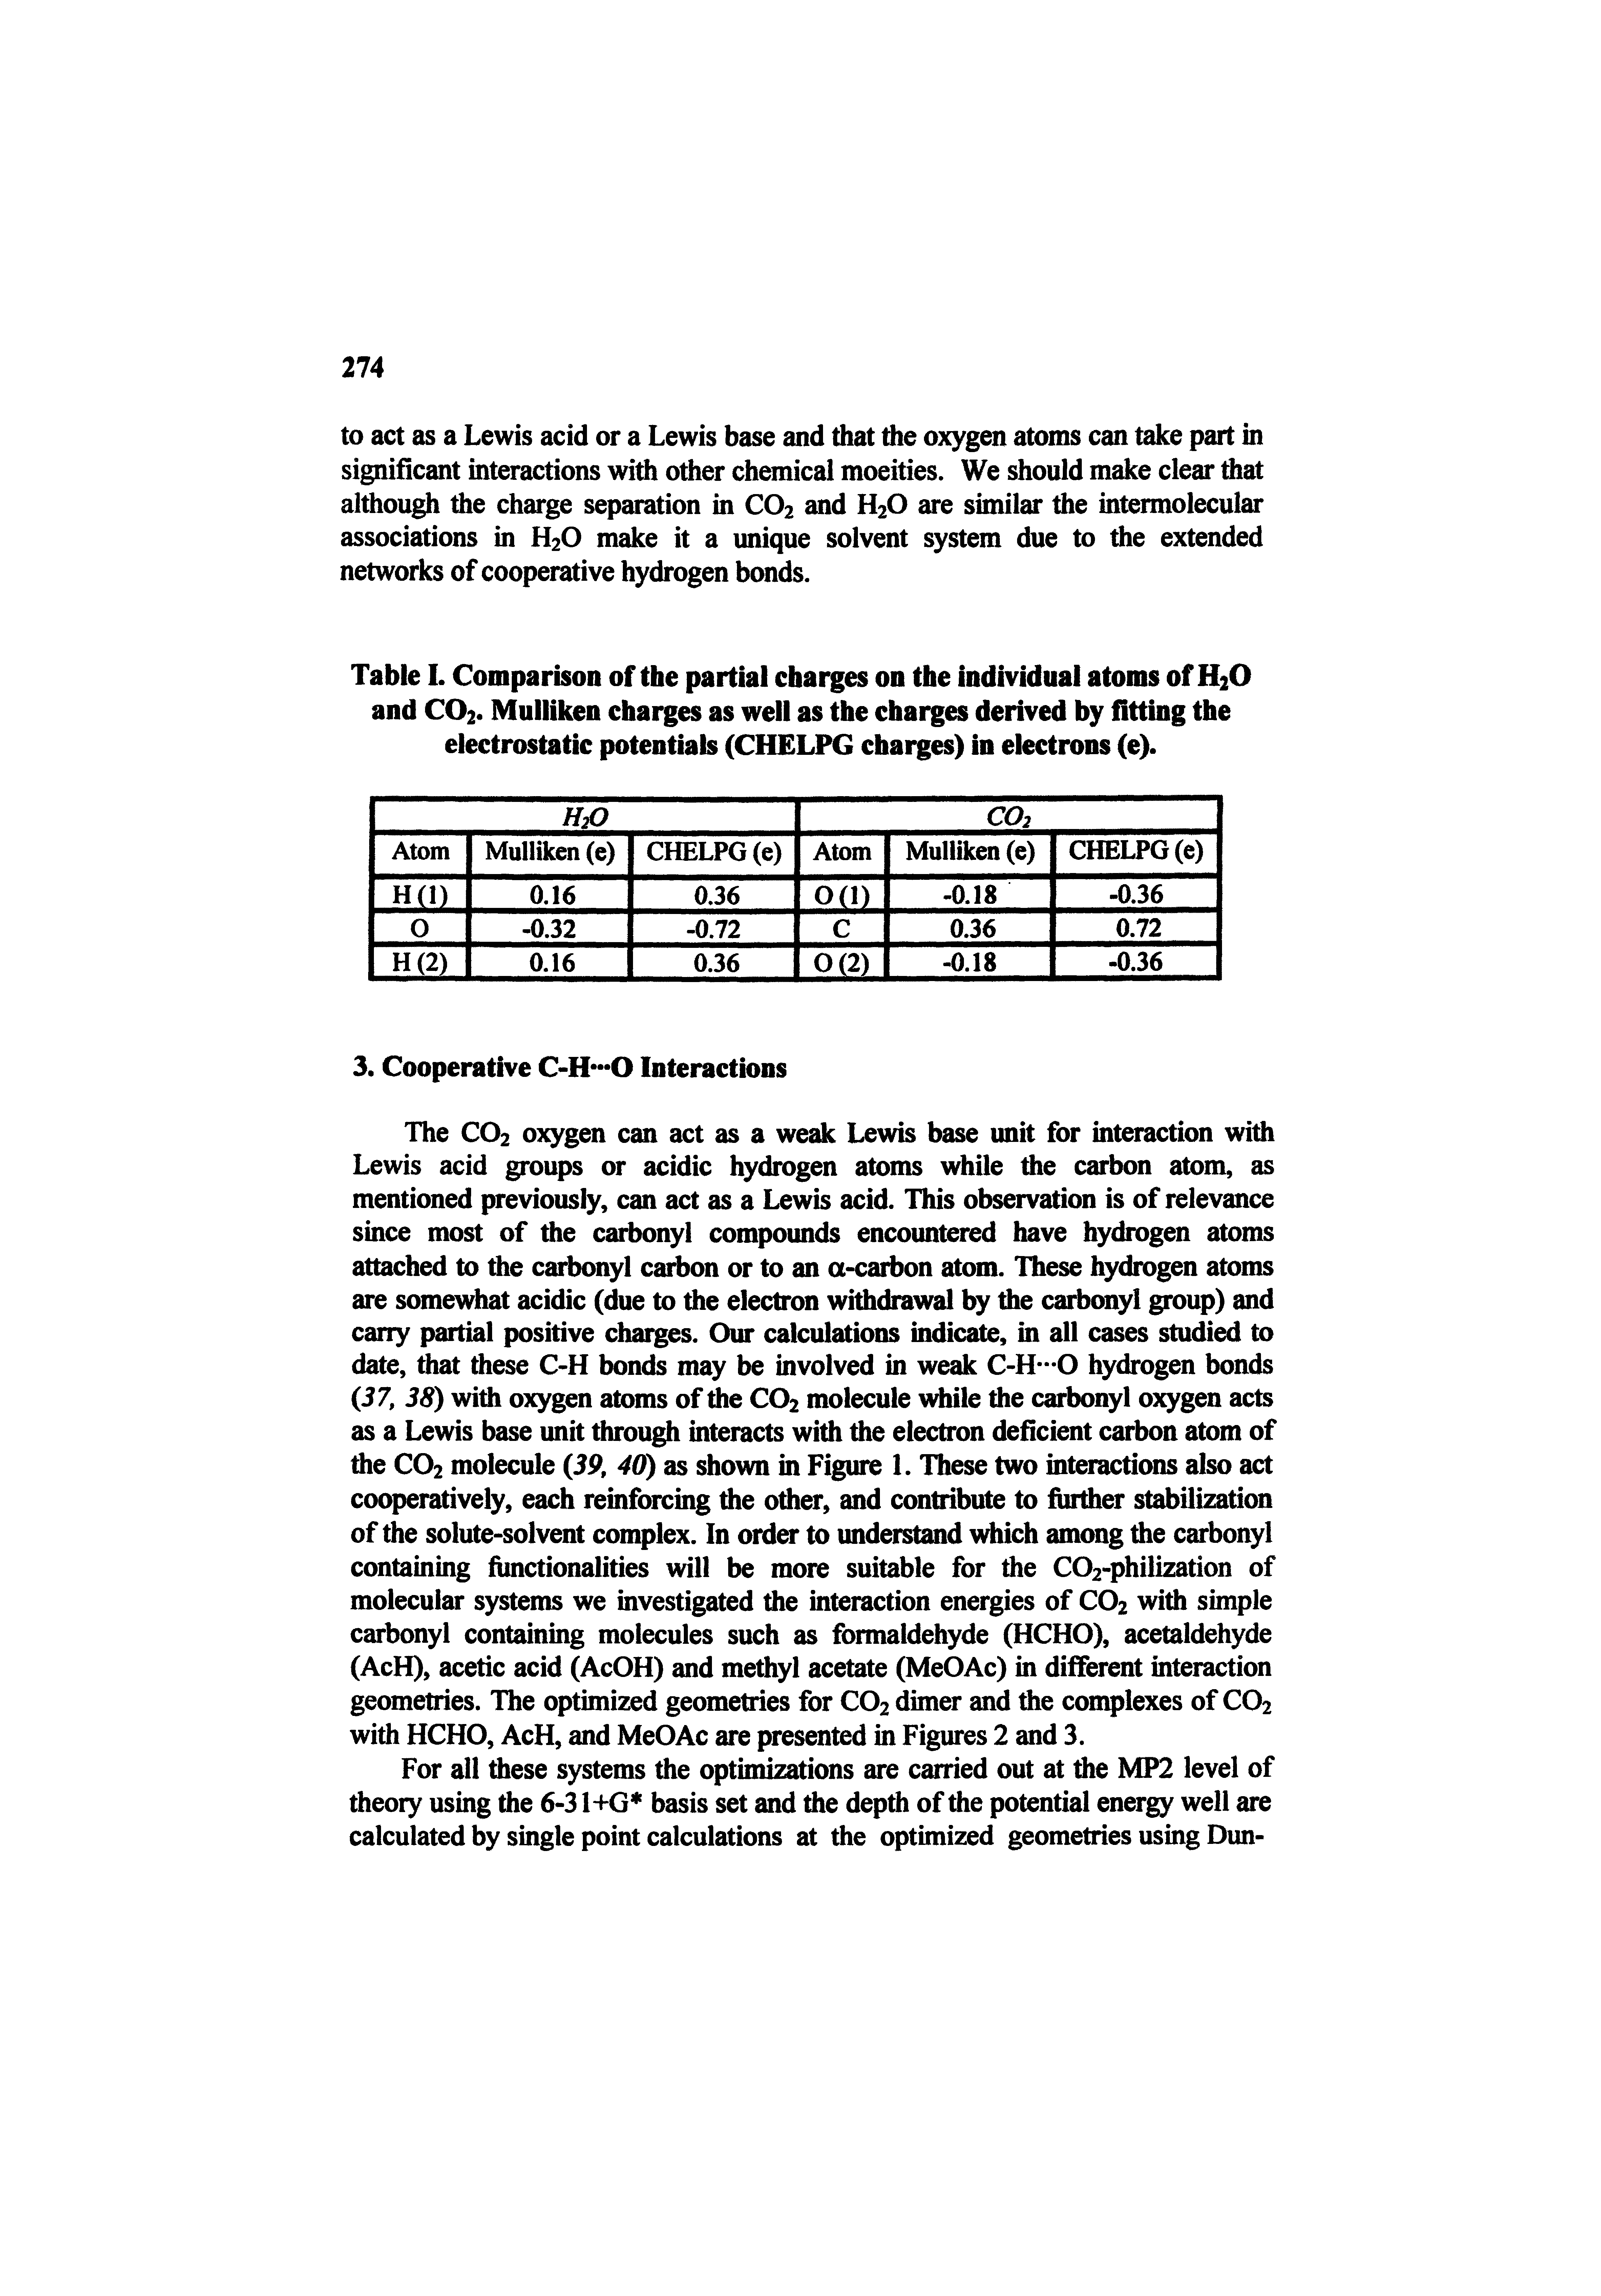 Table I. Comparison of the partial charges on the individual atoms of H2O and CO2. Mulliken charges as well as the charges derived by fitting the electrostatic potentials (CHELPG charges) in electrons (e).